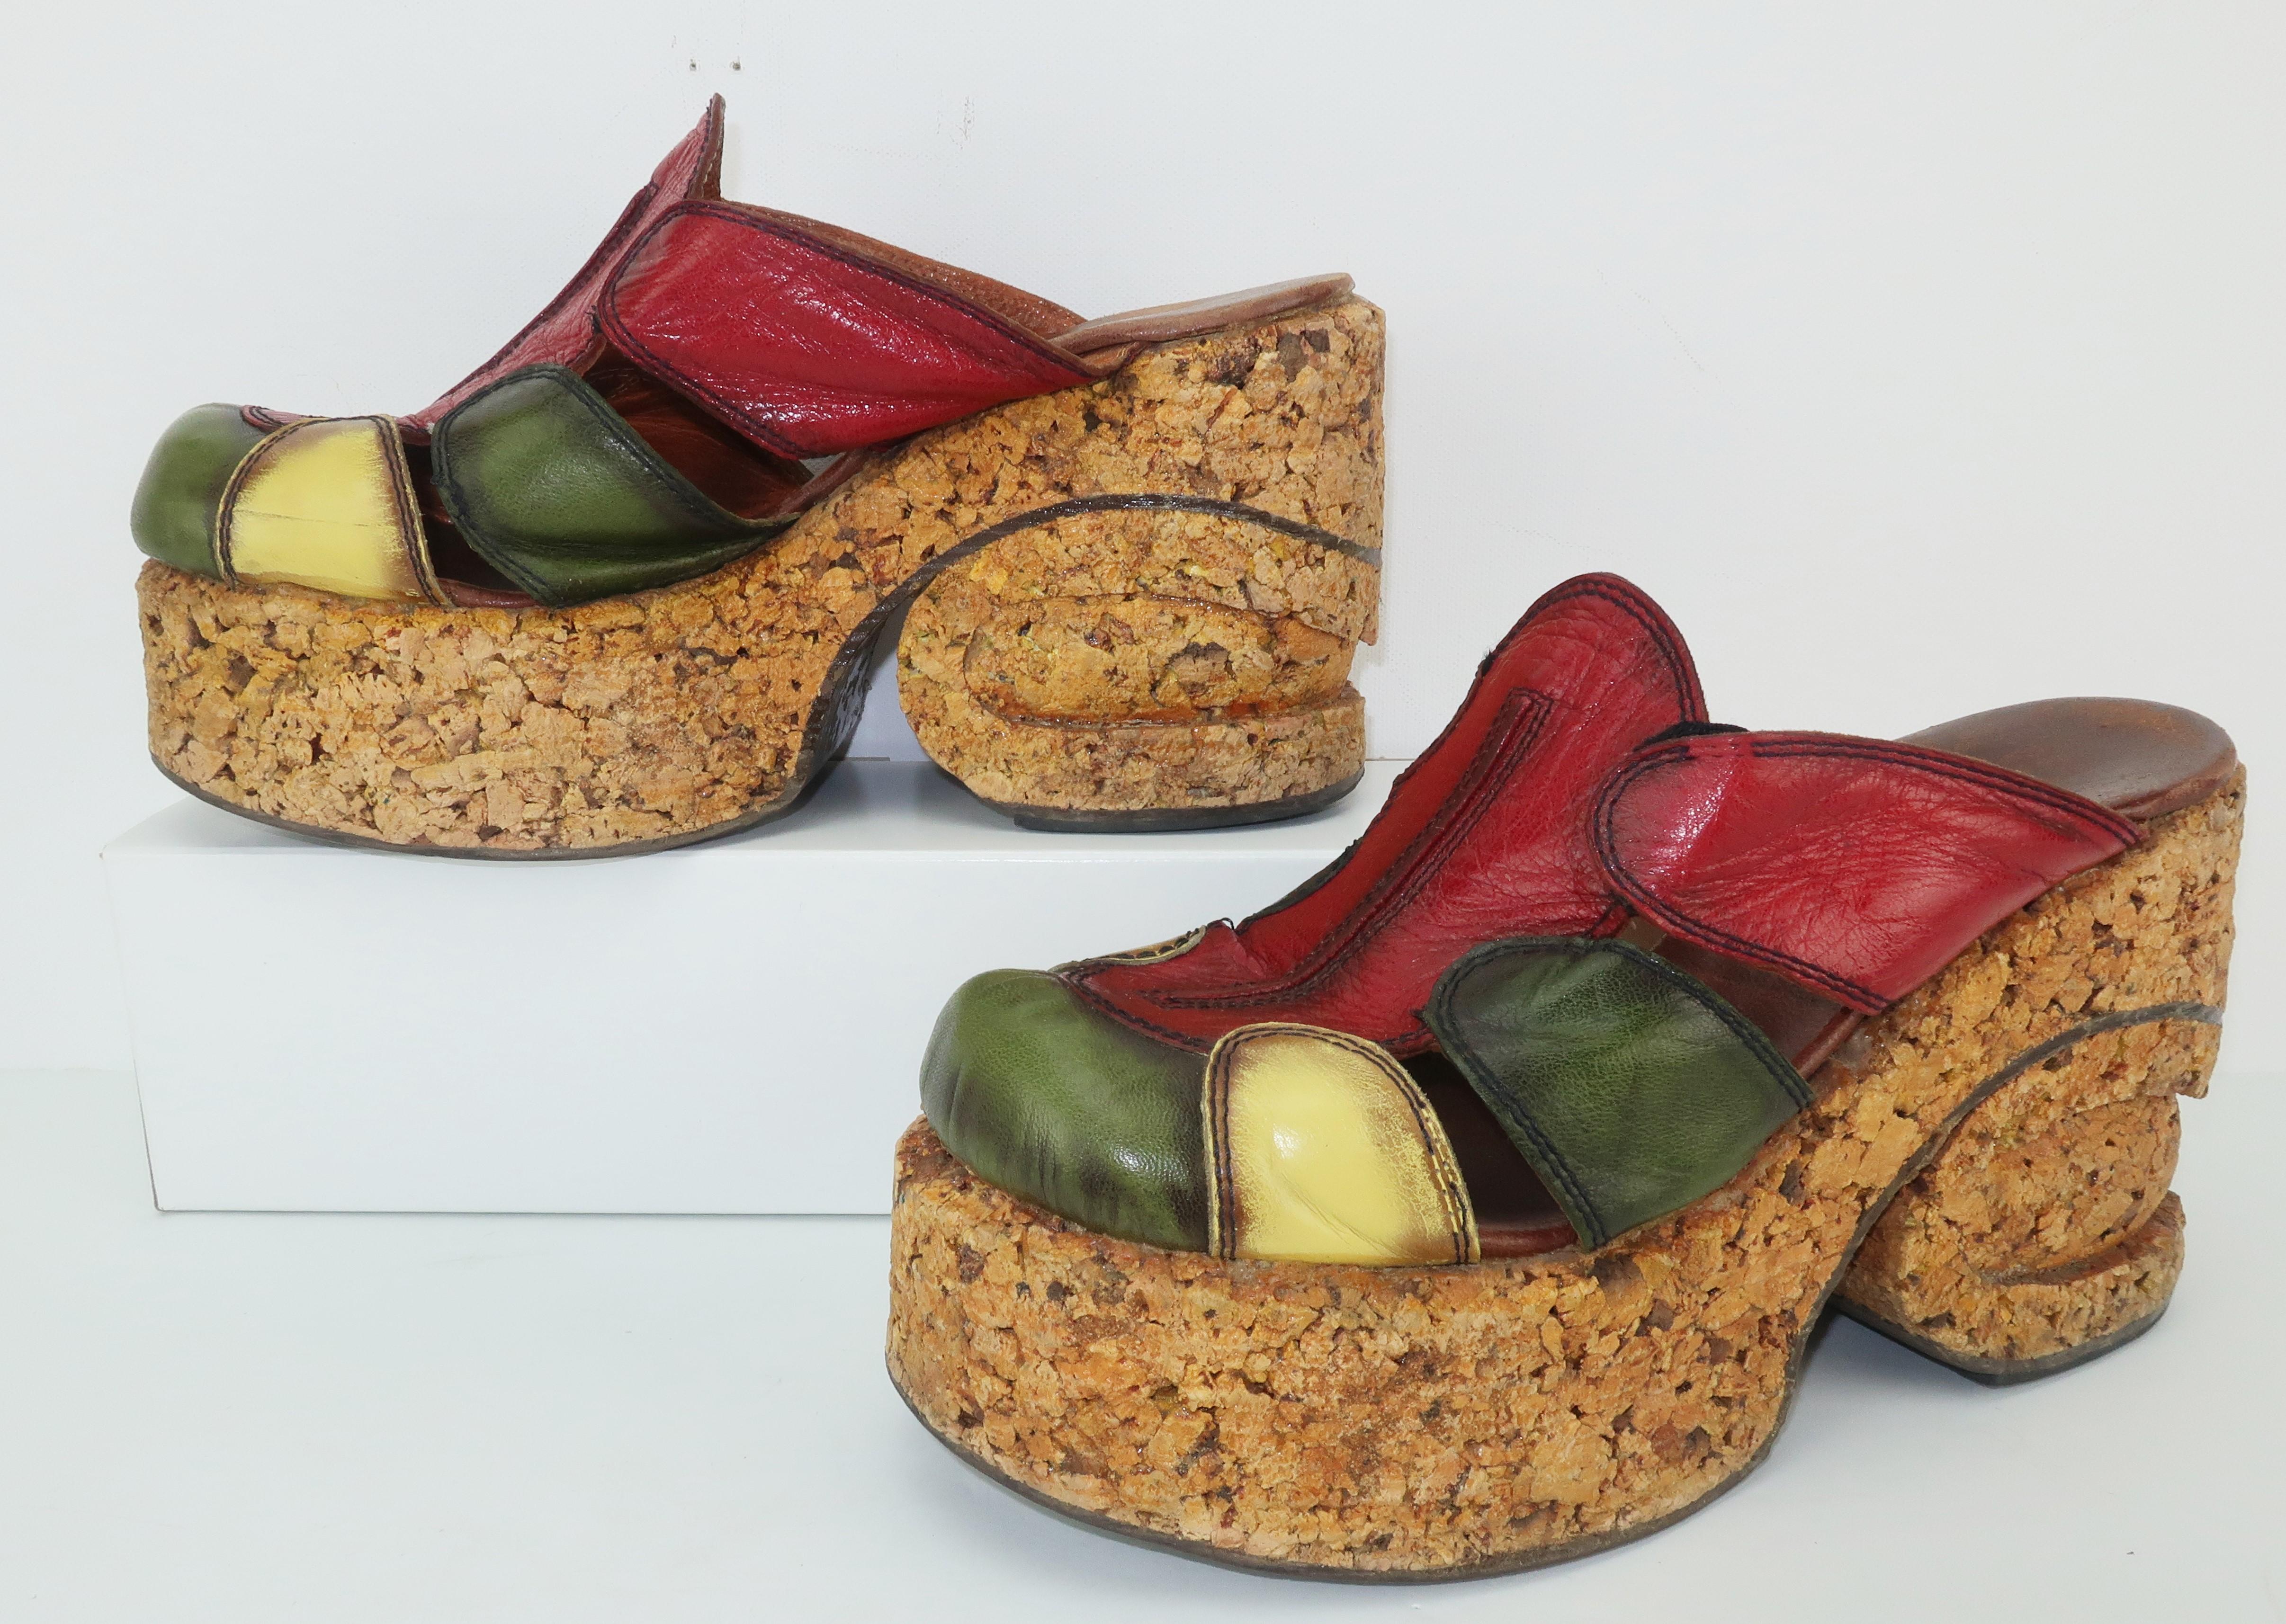 Dazed and Confused ... Boogie Nights ... Soul Train!  Get all funky and fabulous with these 1970’s Haviv chunky leather platform shoes.  The clog style silhouette features a patchwork of leather in shades of red, green and buttery yellow with a